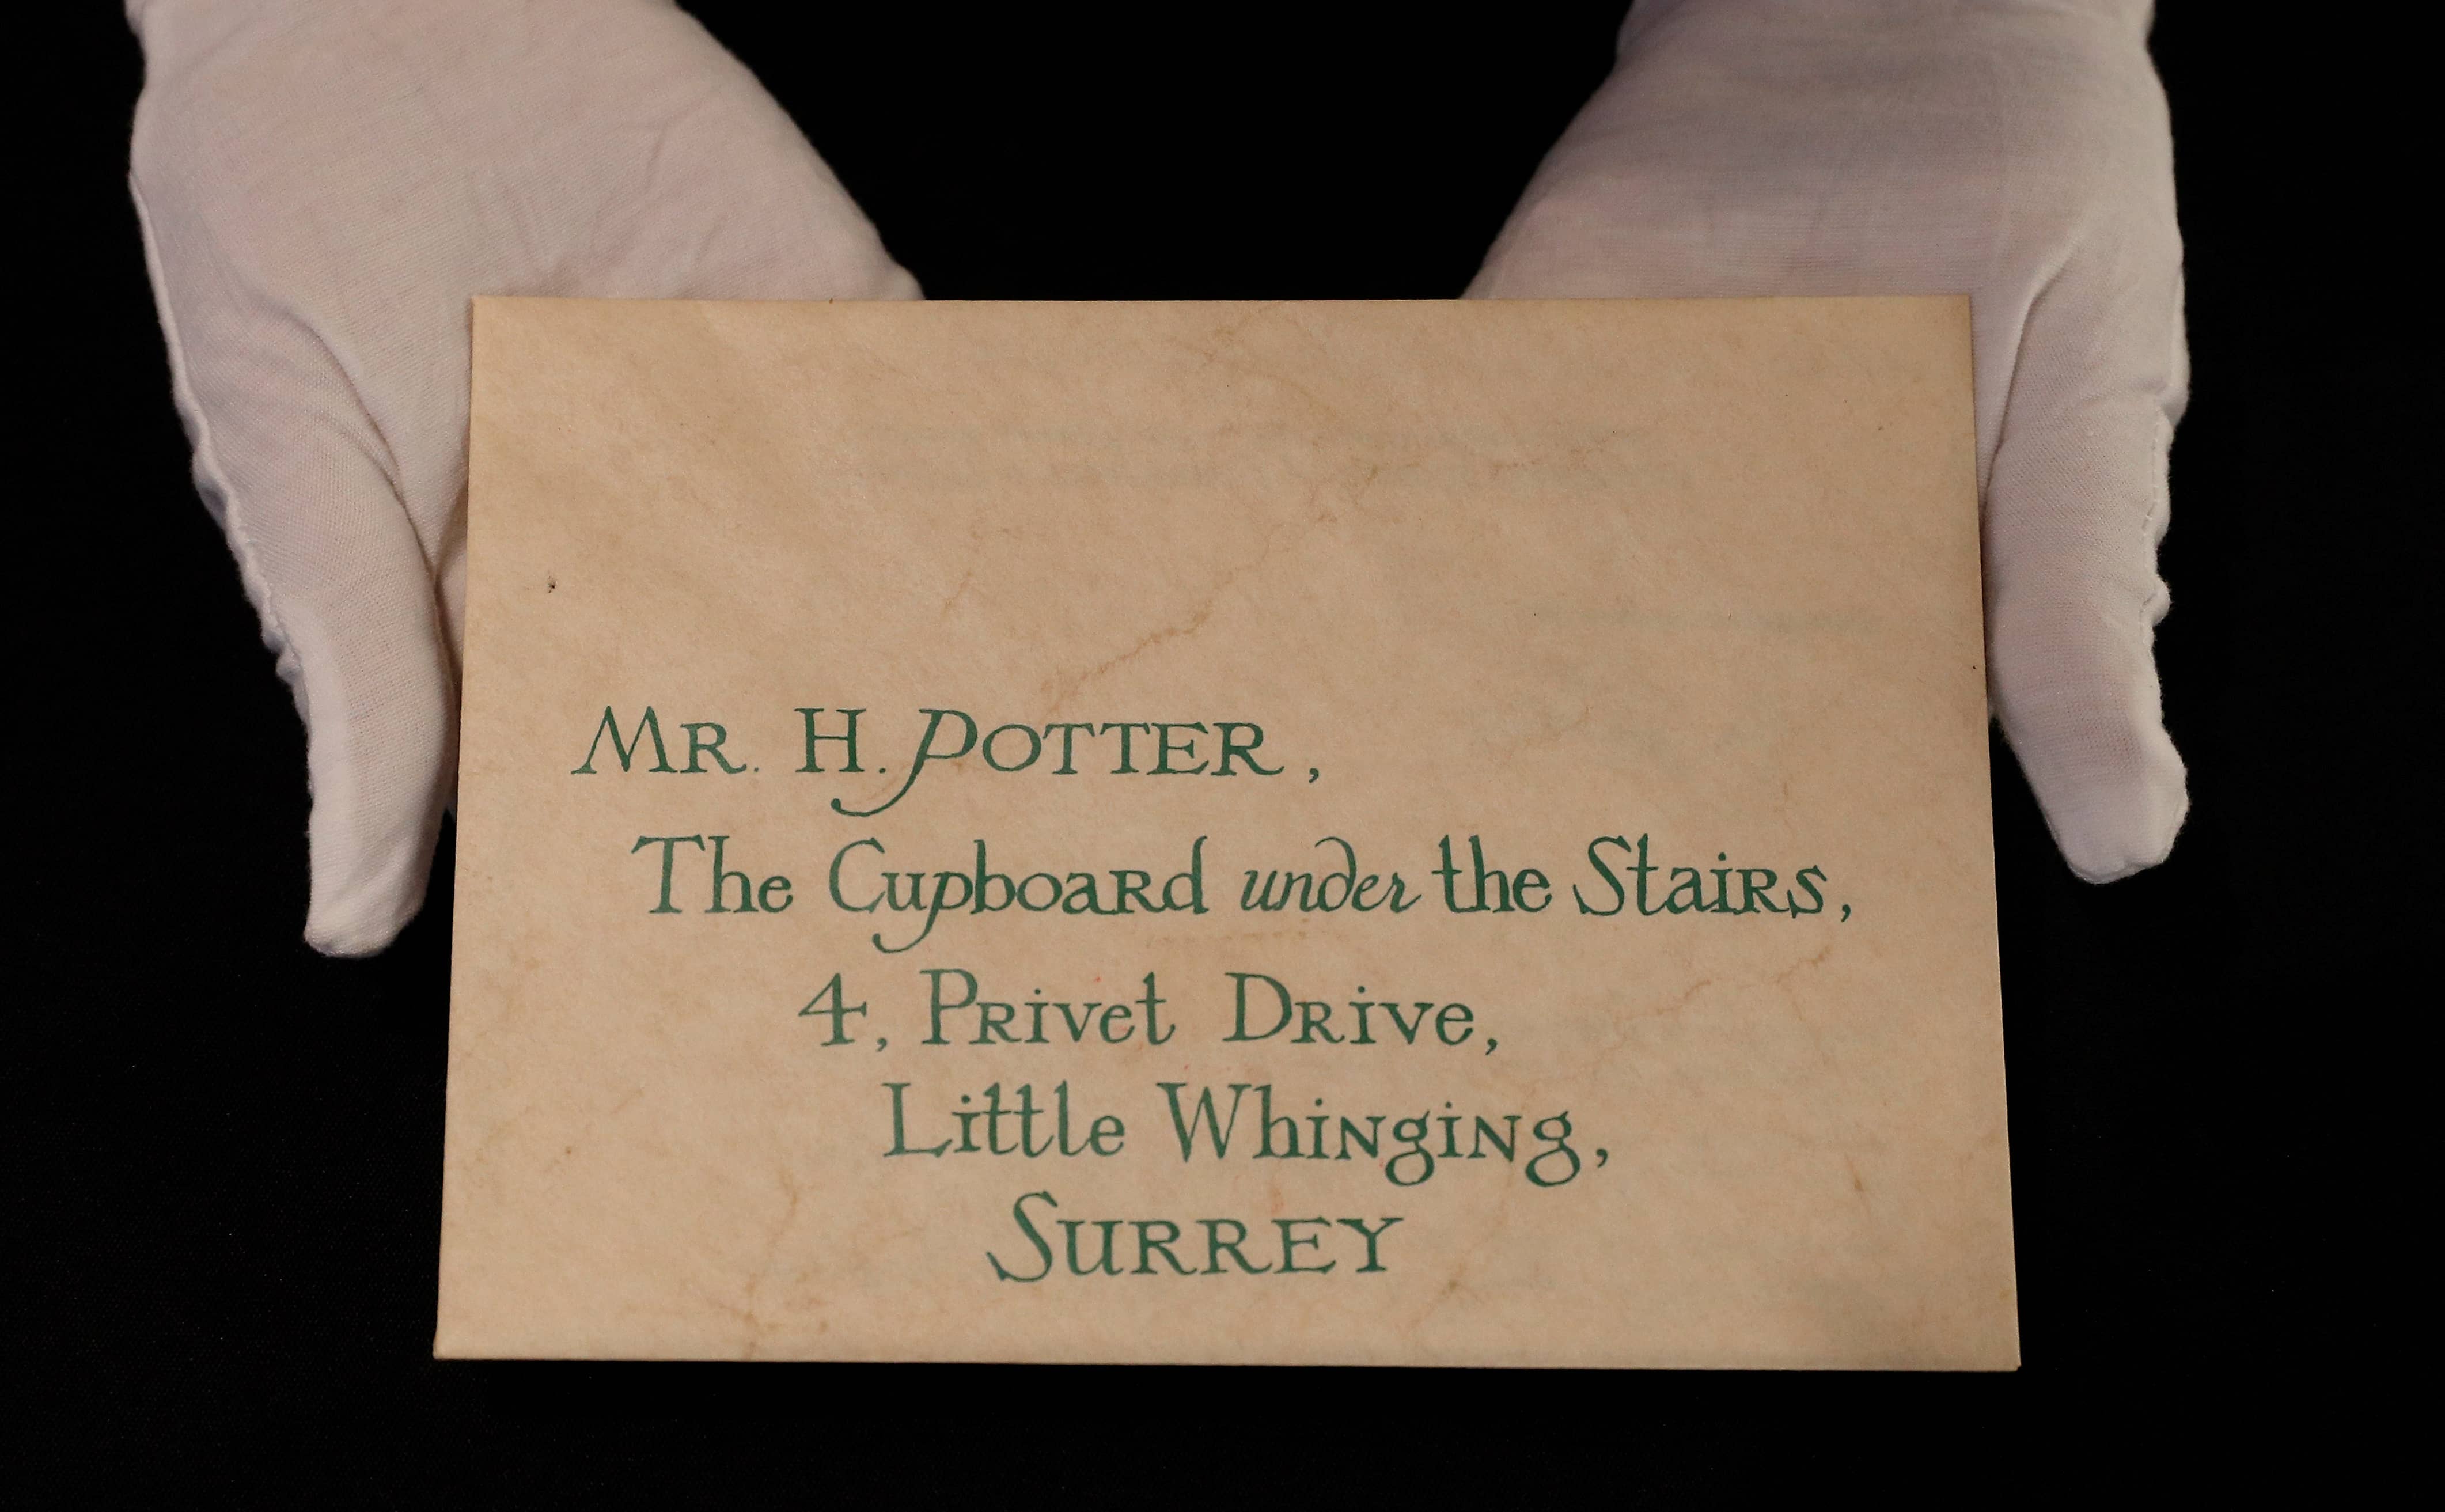 Hogwarts Acceptance Letter From First Harry Potter Movie to Auction